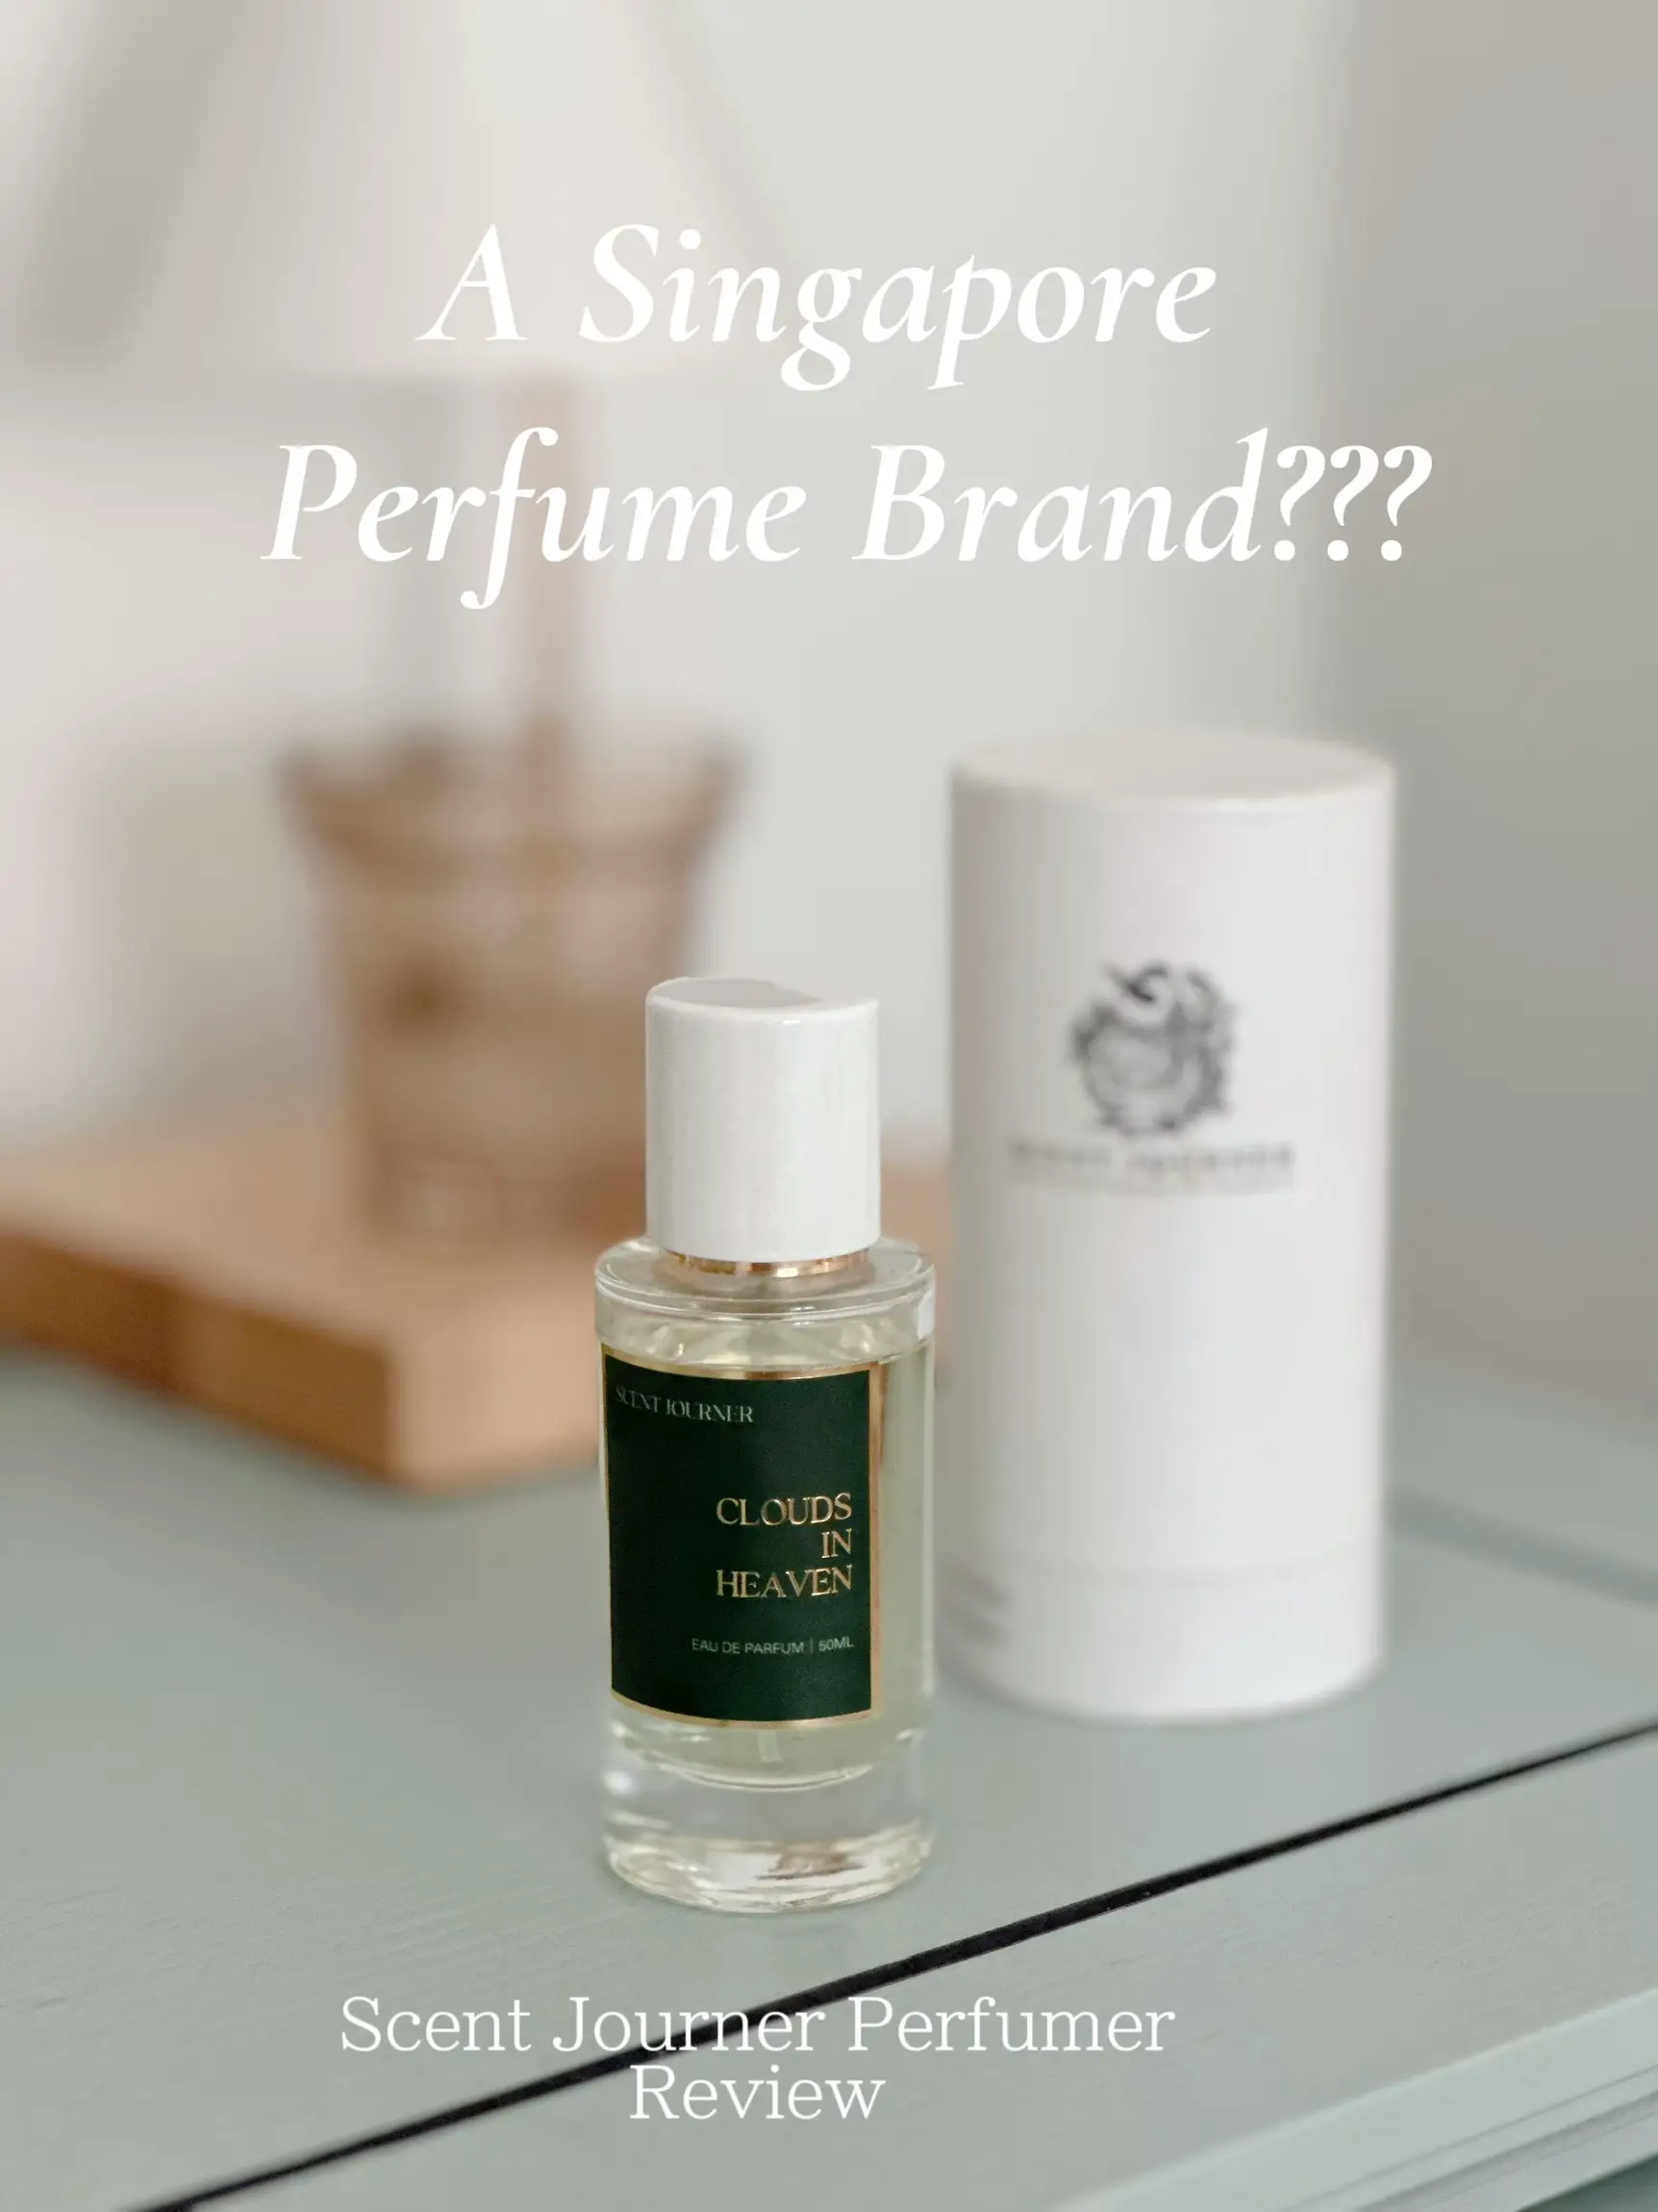 ✨Scent Journer - A Singapore Perfume Brand???'s images